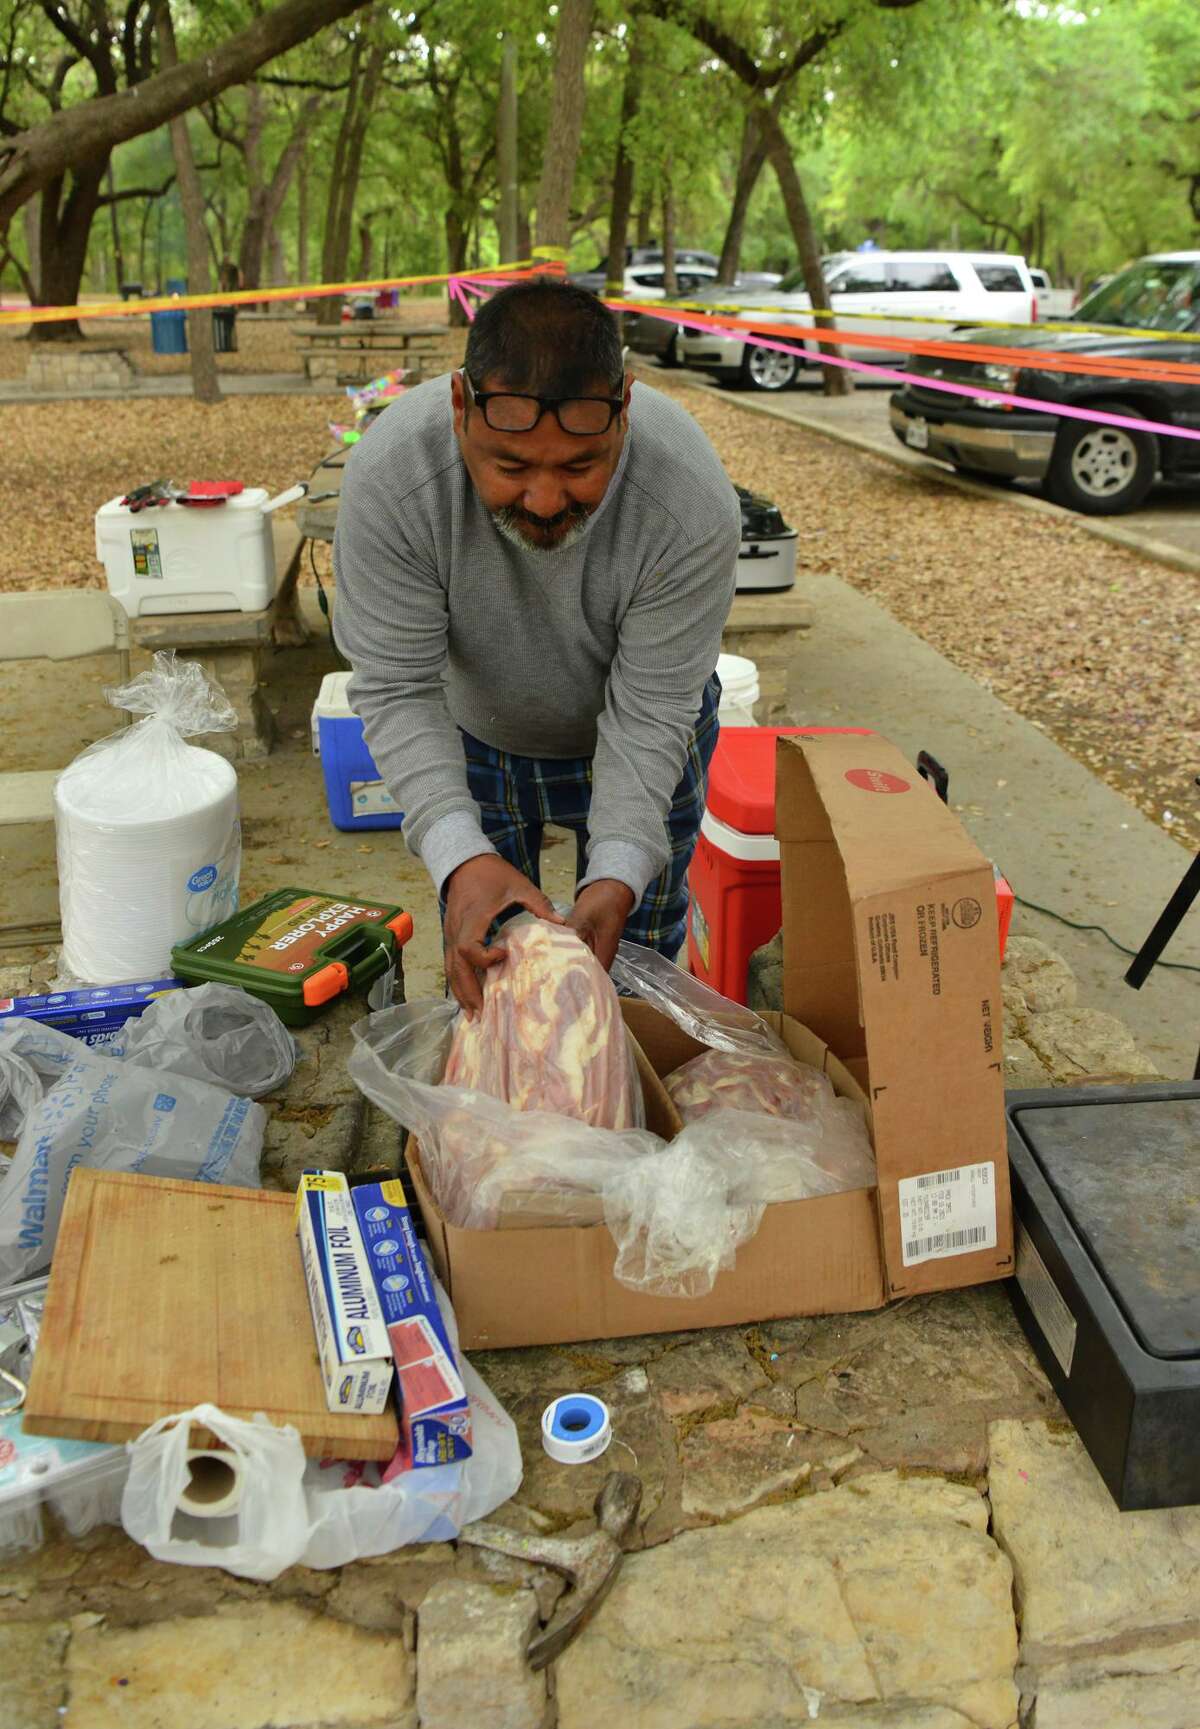 Samuel Rodriguez prepares his fripa's during an Easter Sunday barbeque in Brackenridge.